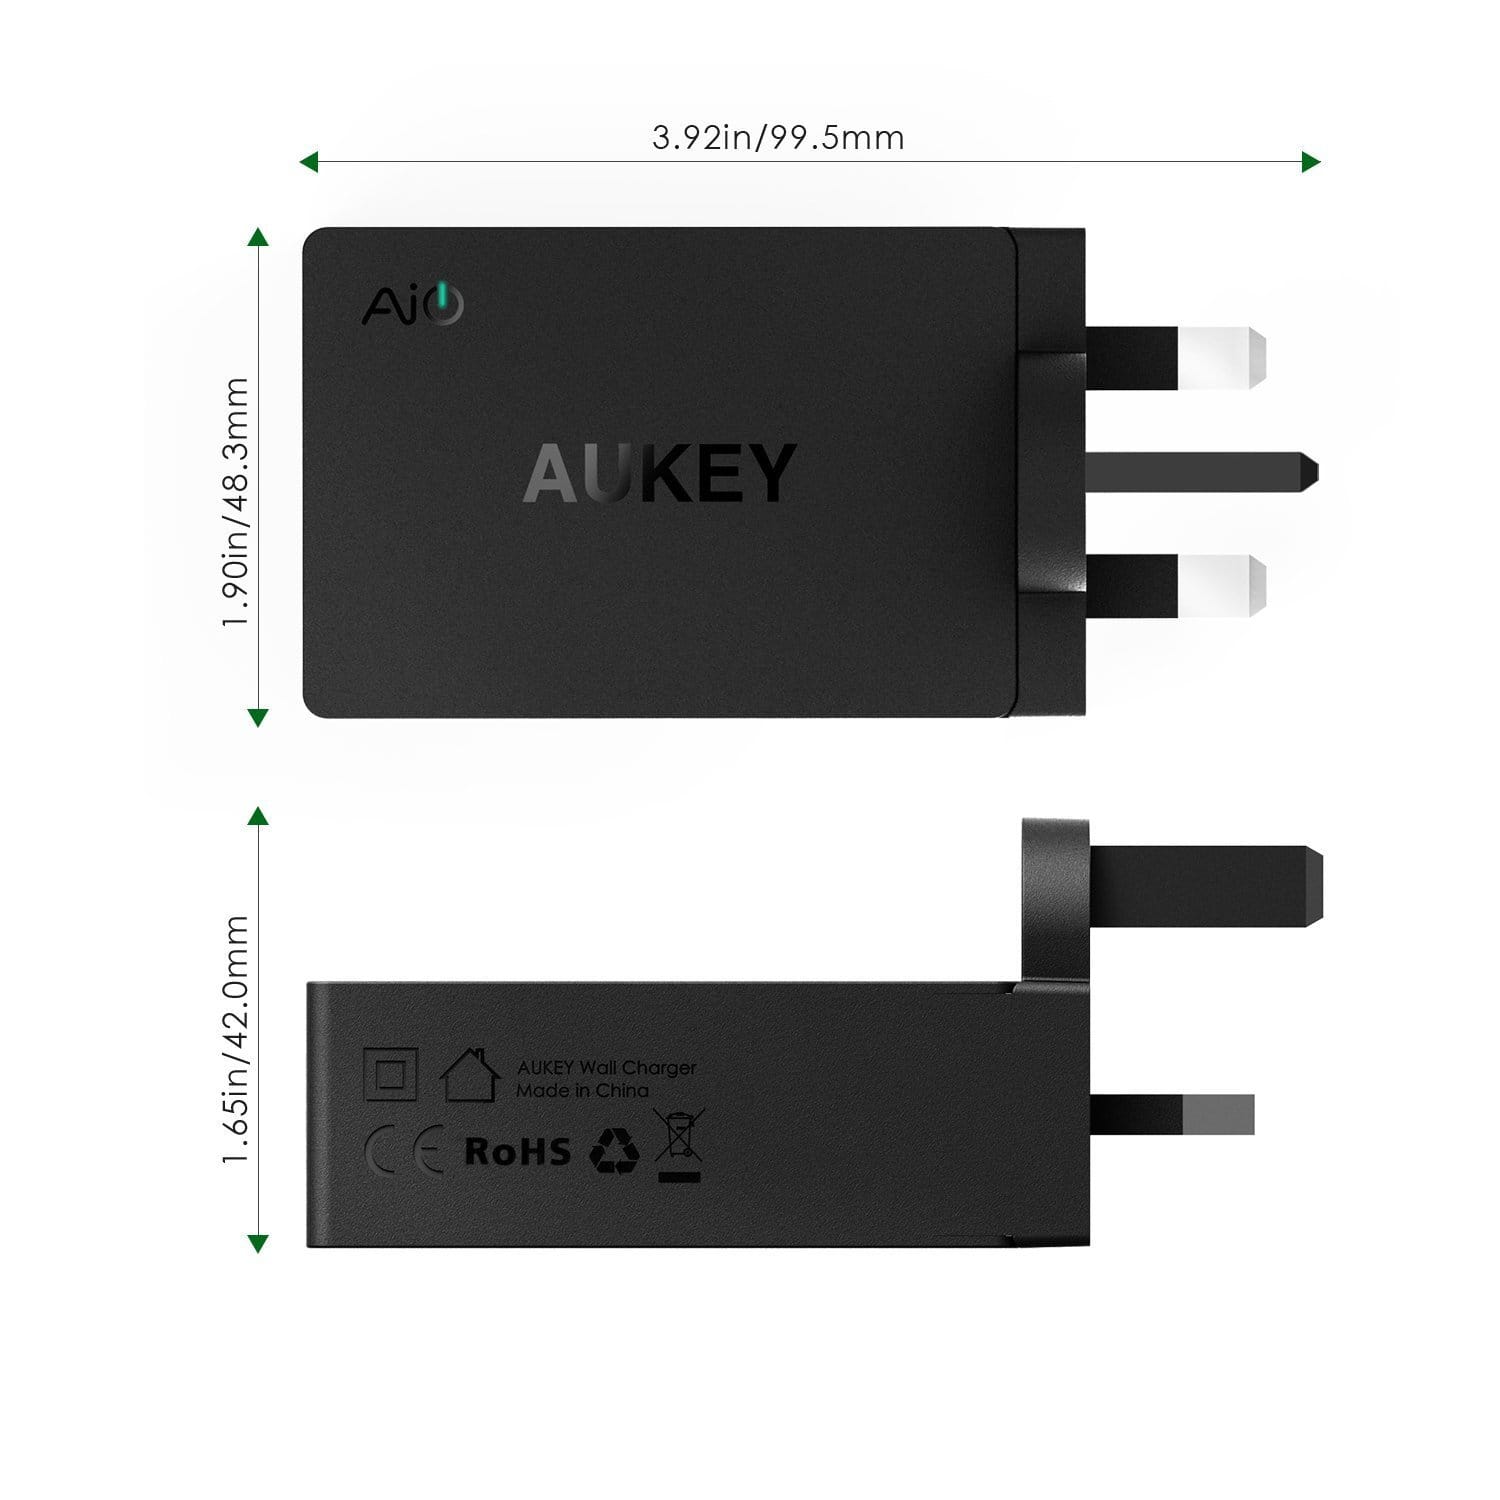 AUKEY PA-T14-UK 3 Port USB Qualcomm Quick Charge 3.0 Travel Charger - Aukey Malaysia Official Store